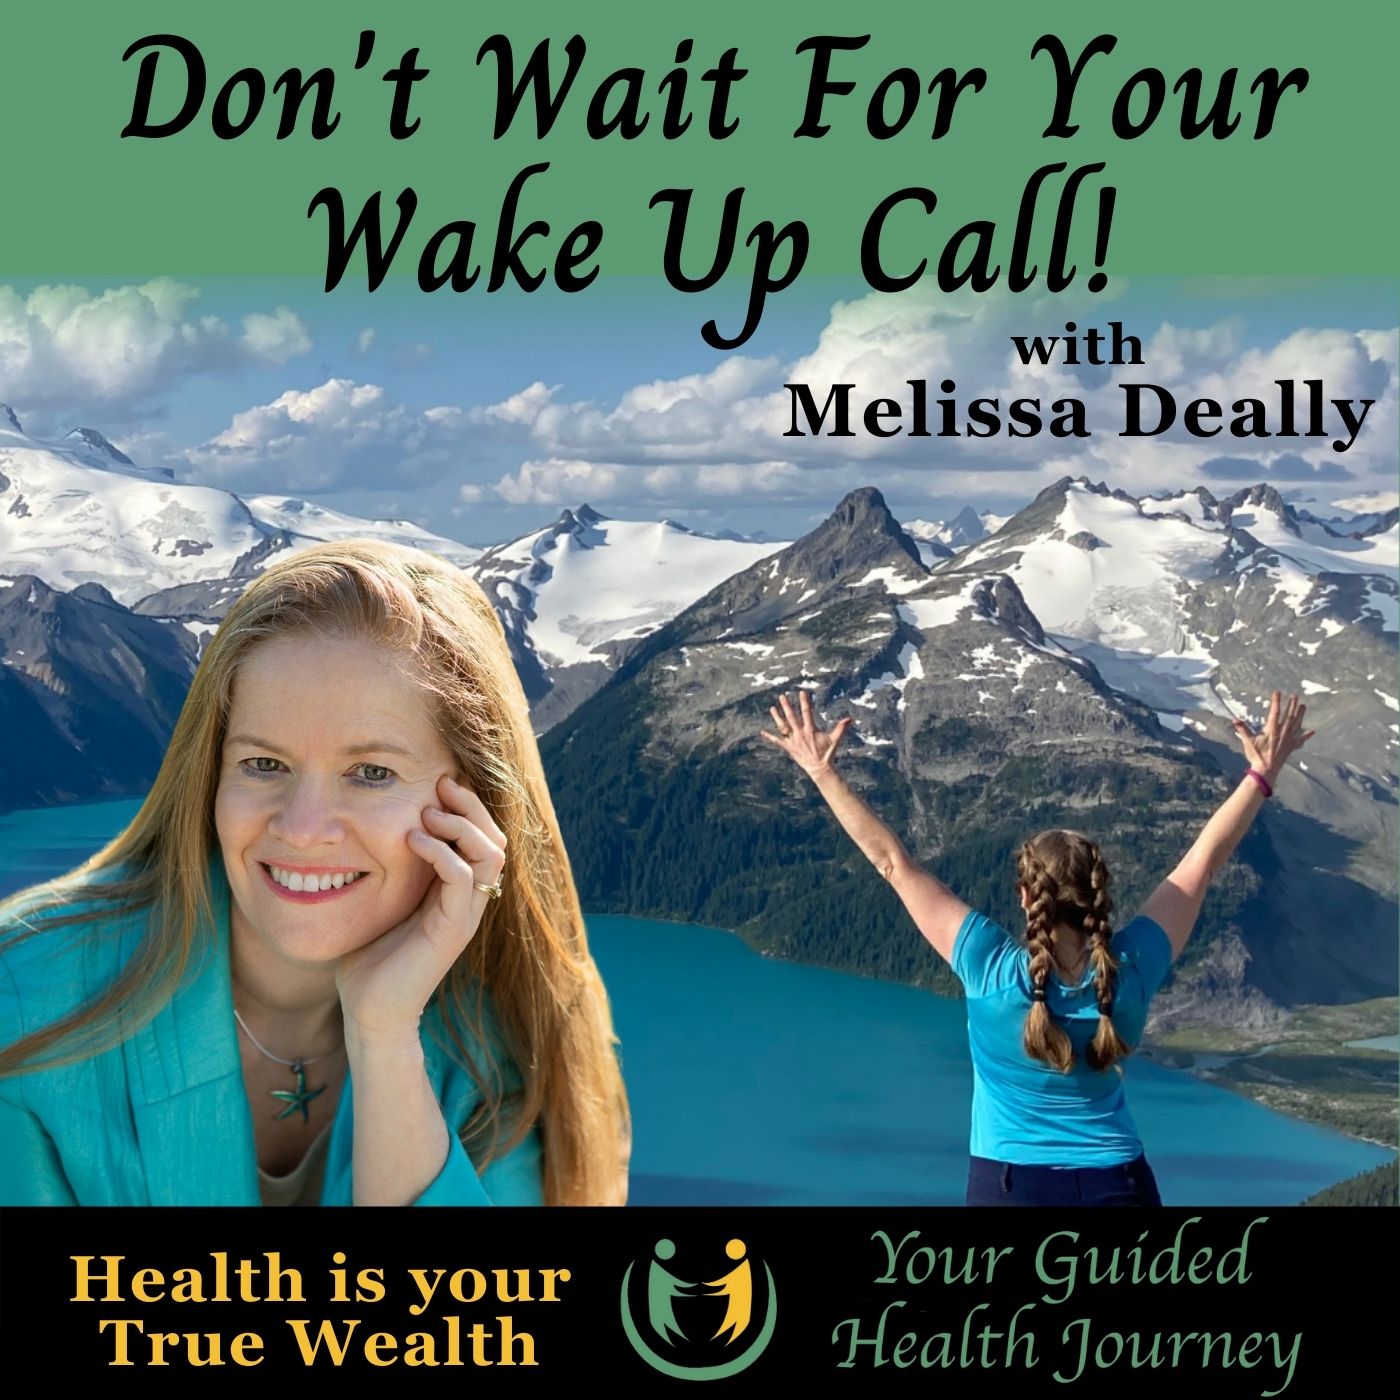 Showcasing The Depth And Breadth Of Holistic Health | Ep 93